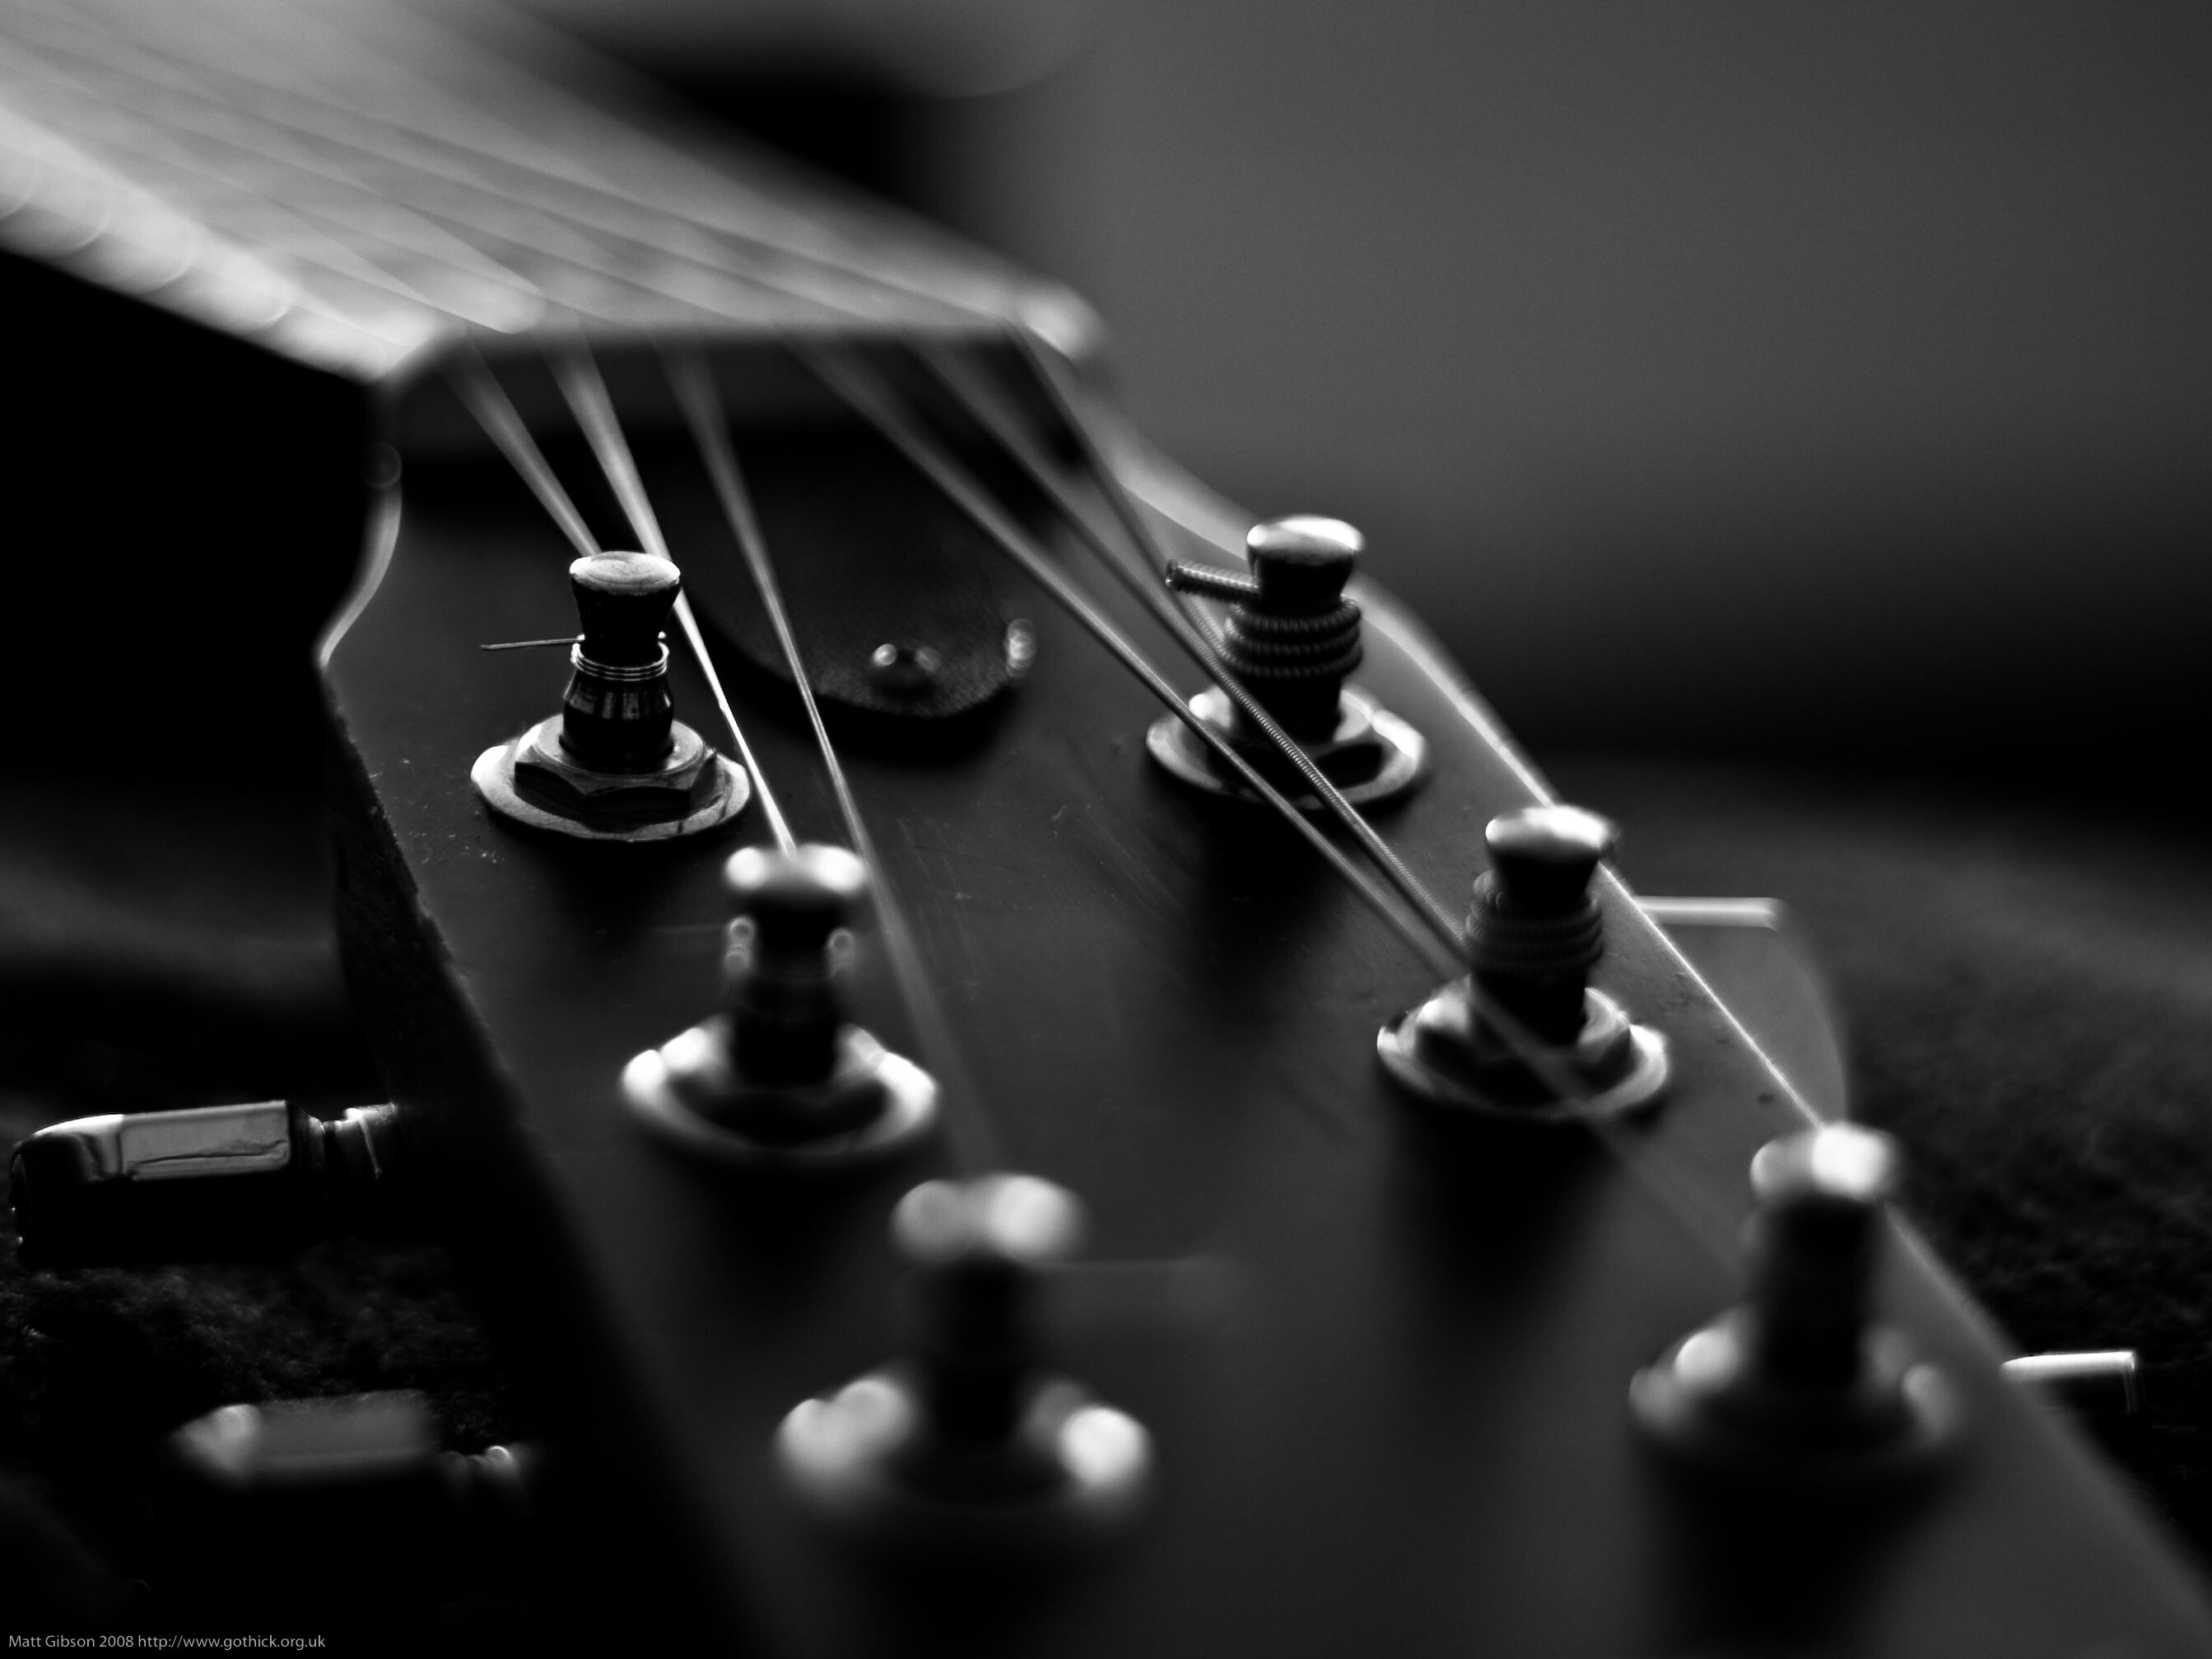 Gibson Guitar: Electronic Instrument, Tunning Pegs, Adjustable Tension Of The Strings. 2690x2020 HD Wallpaper.